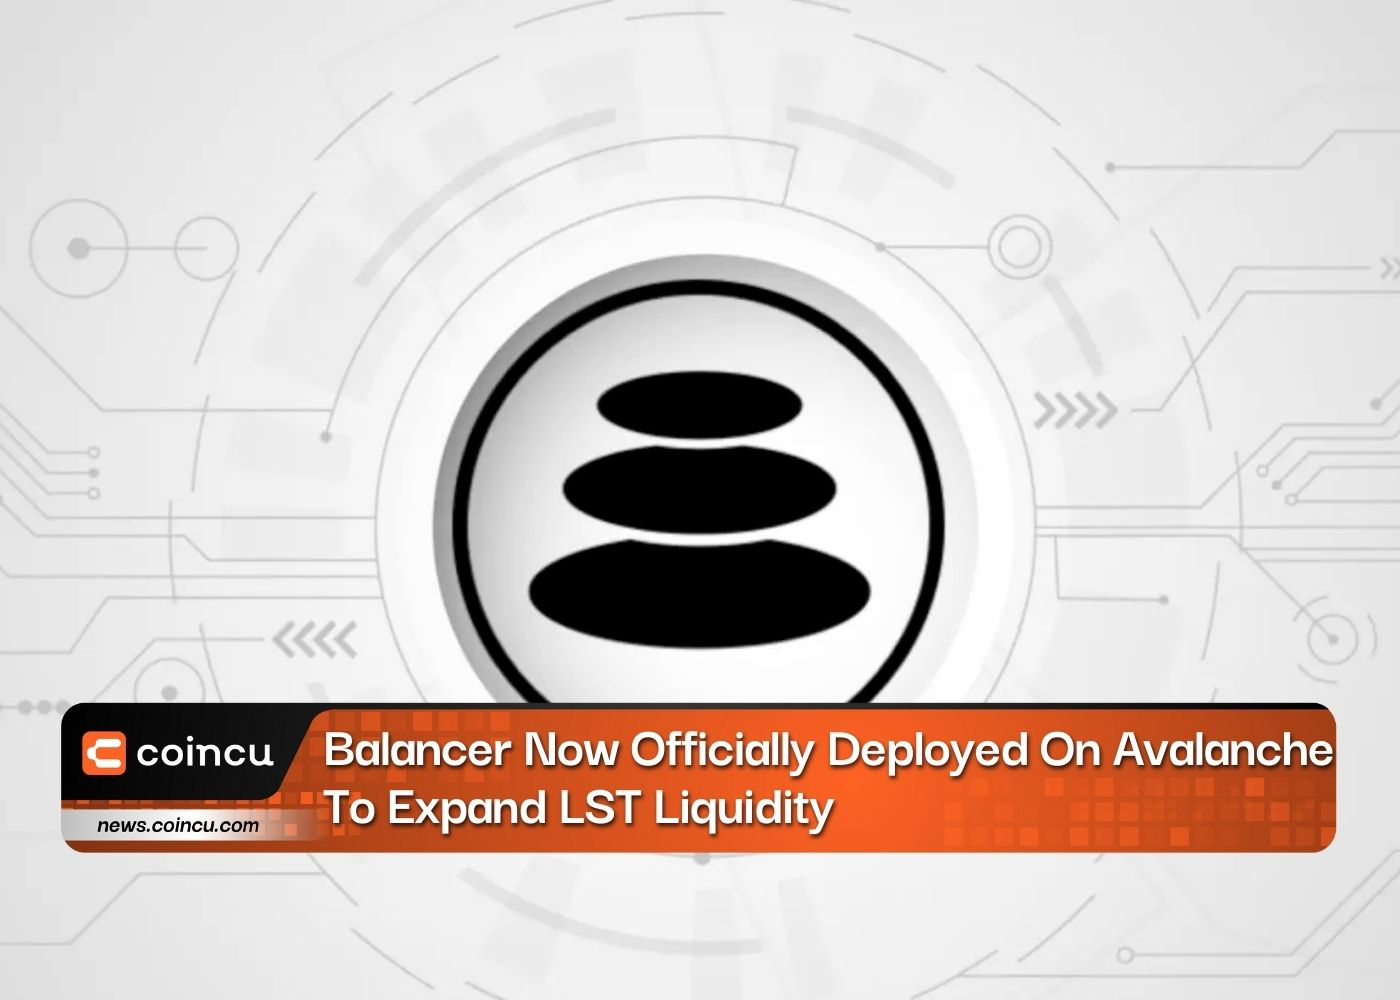 Balancer Now Officially Deployed On Avalanche To Expand LST Liquidity